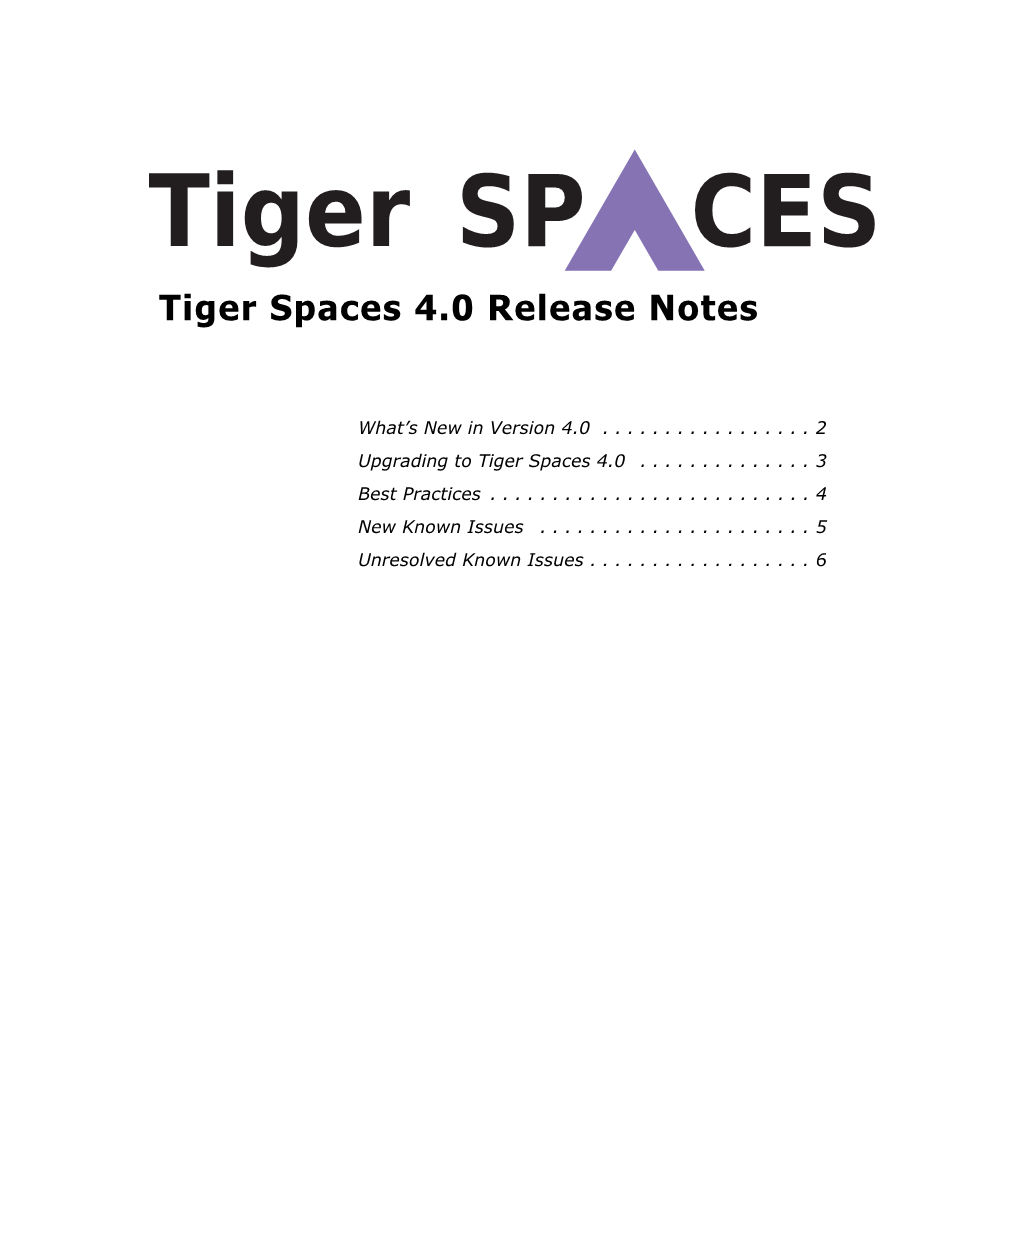 Tiger Spaces 4.0 Release Notes